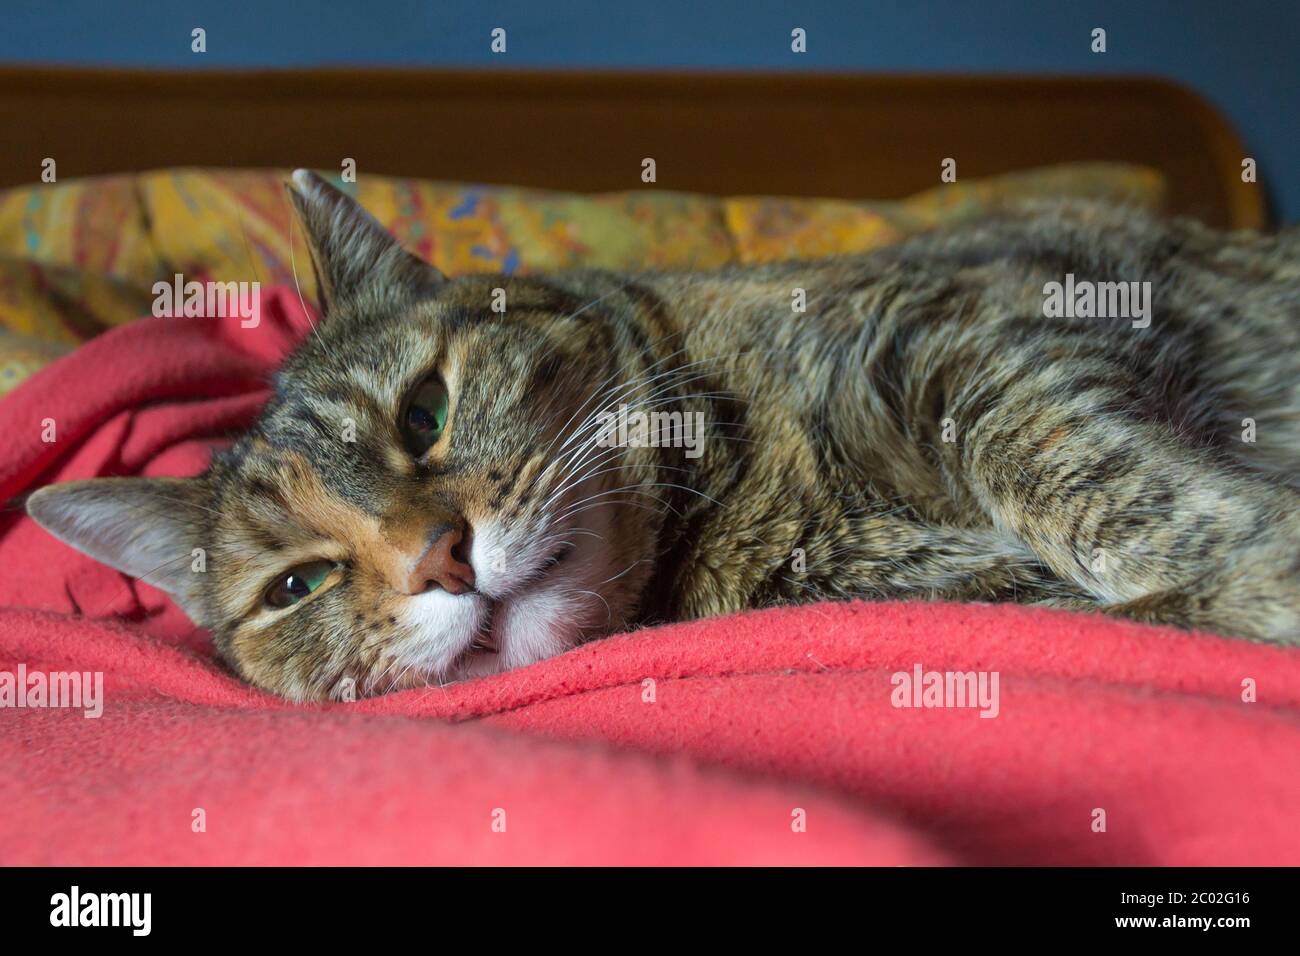 A tabby cat in bed looking away from camera Stock Photo